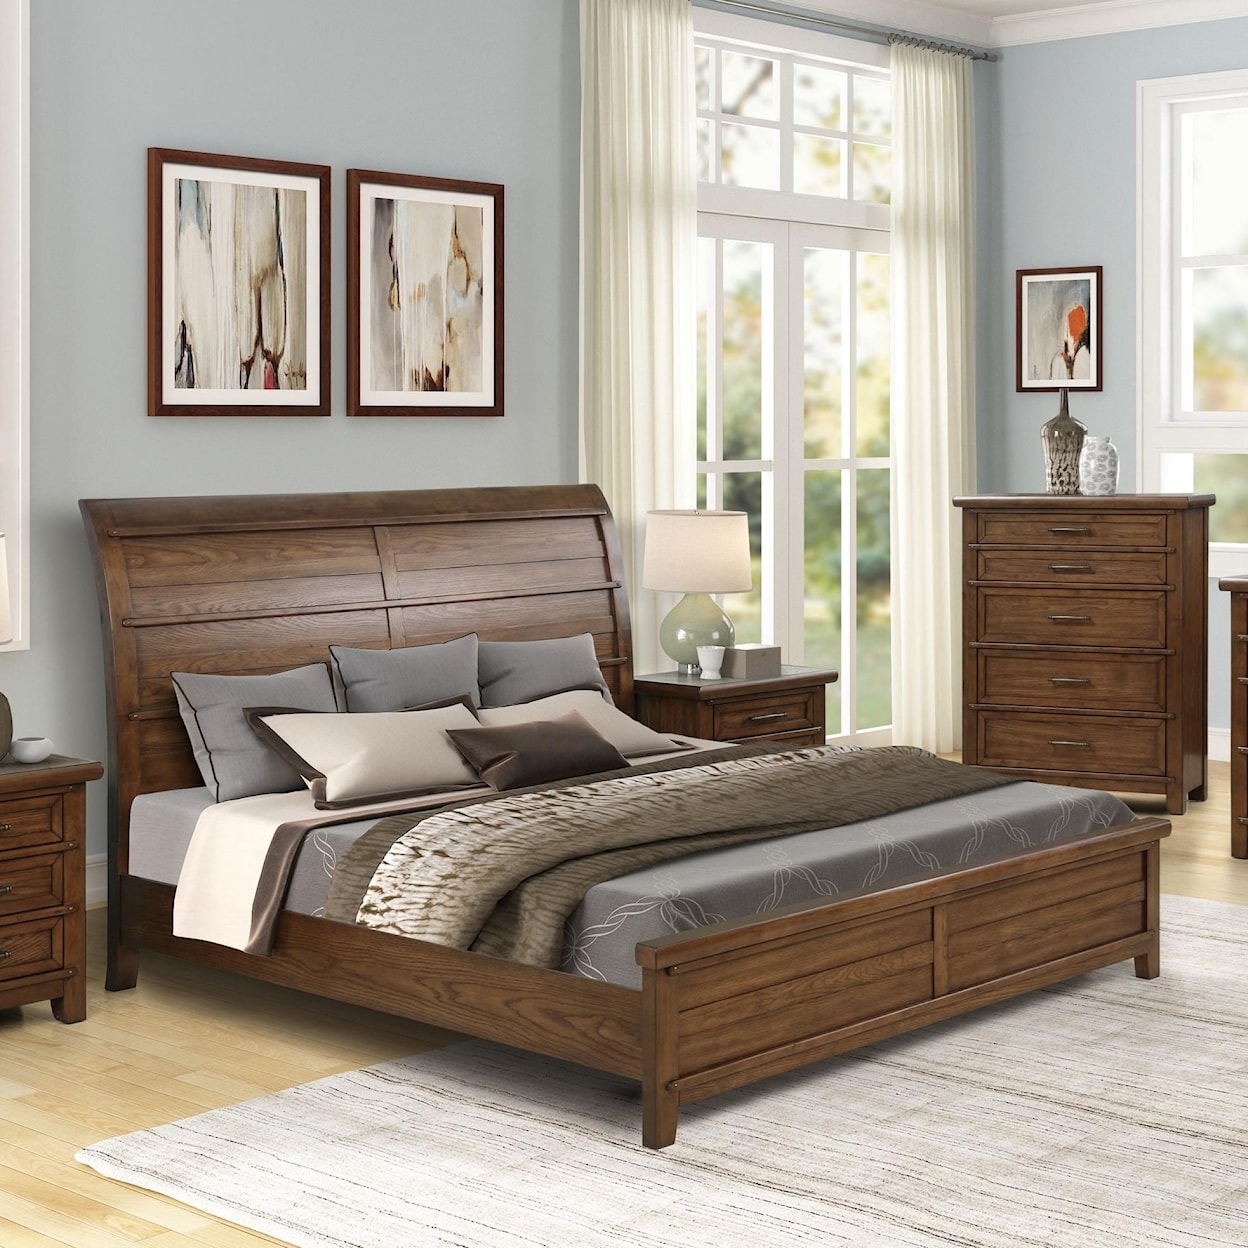 New Classic Furniture Fairfax County King Sleigh Bed